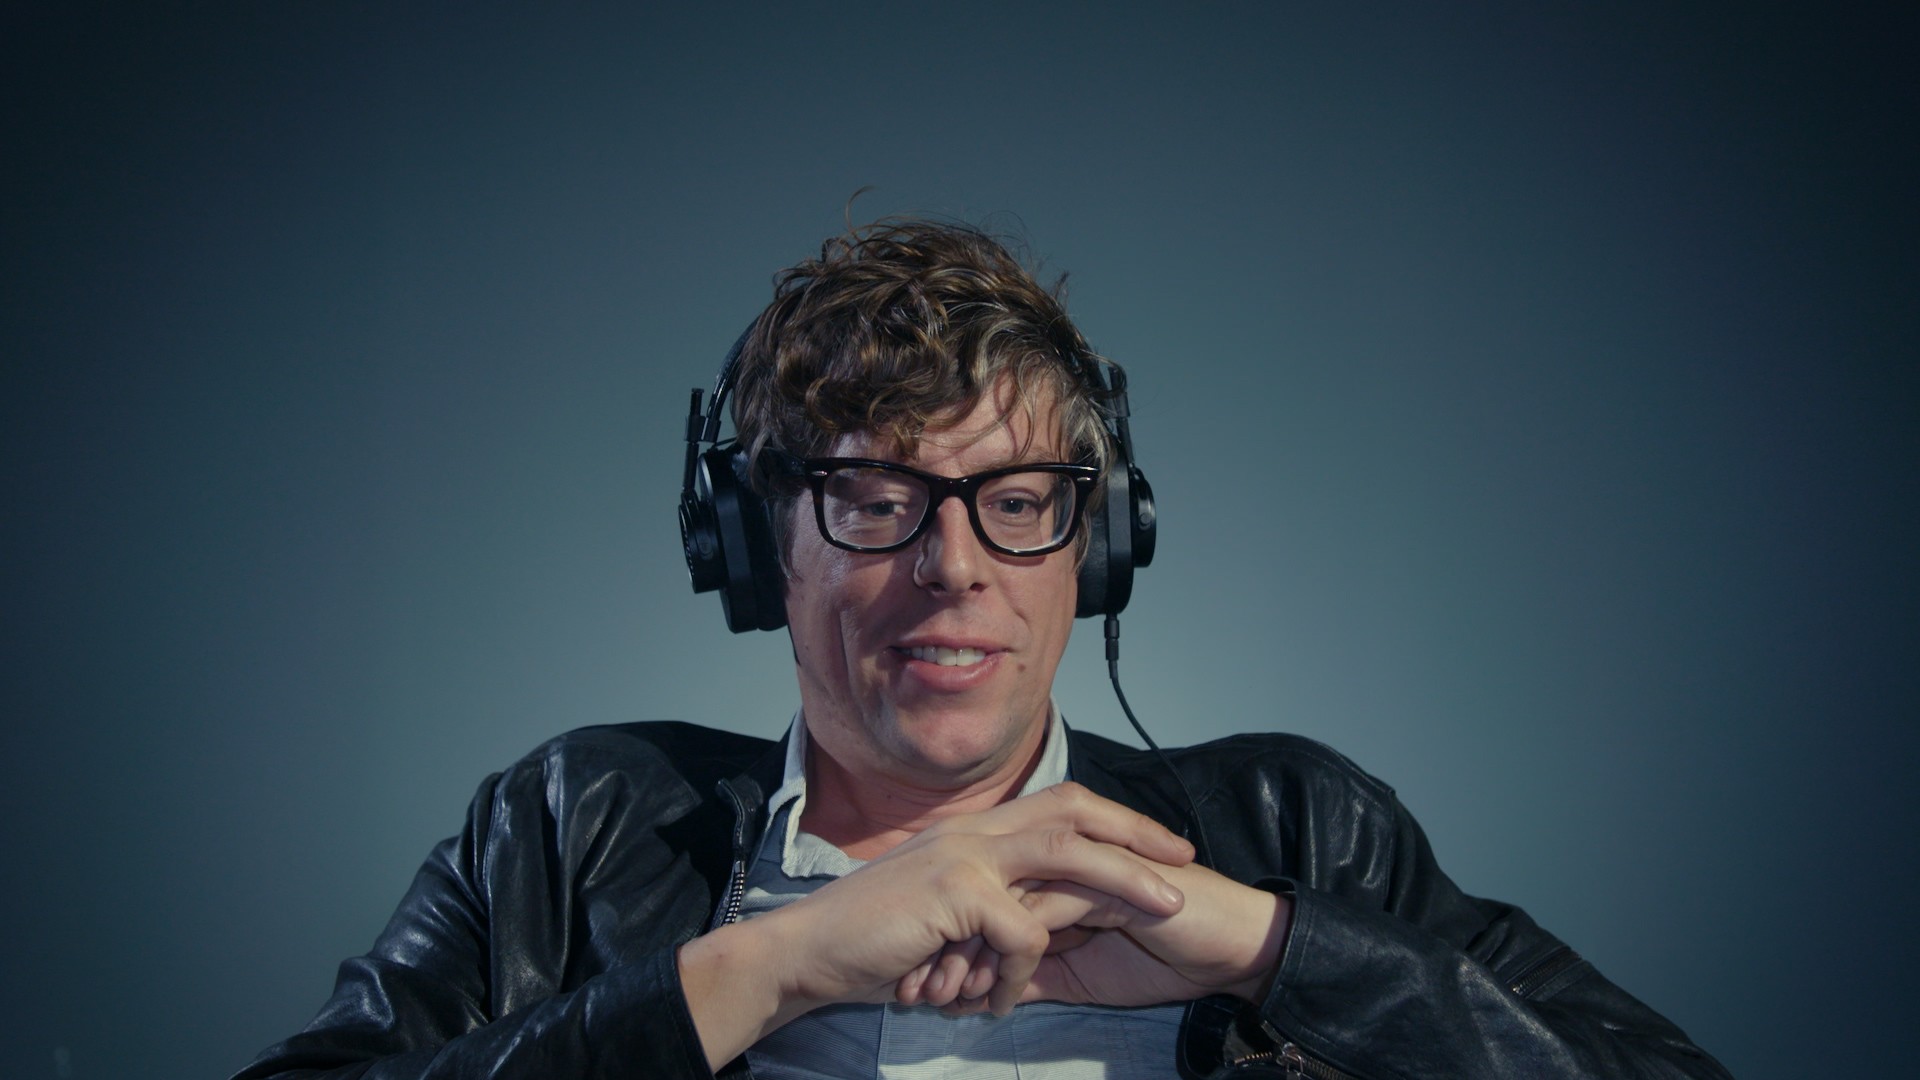 The Black Keys' Patrick Carney explains why people listen to